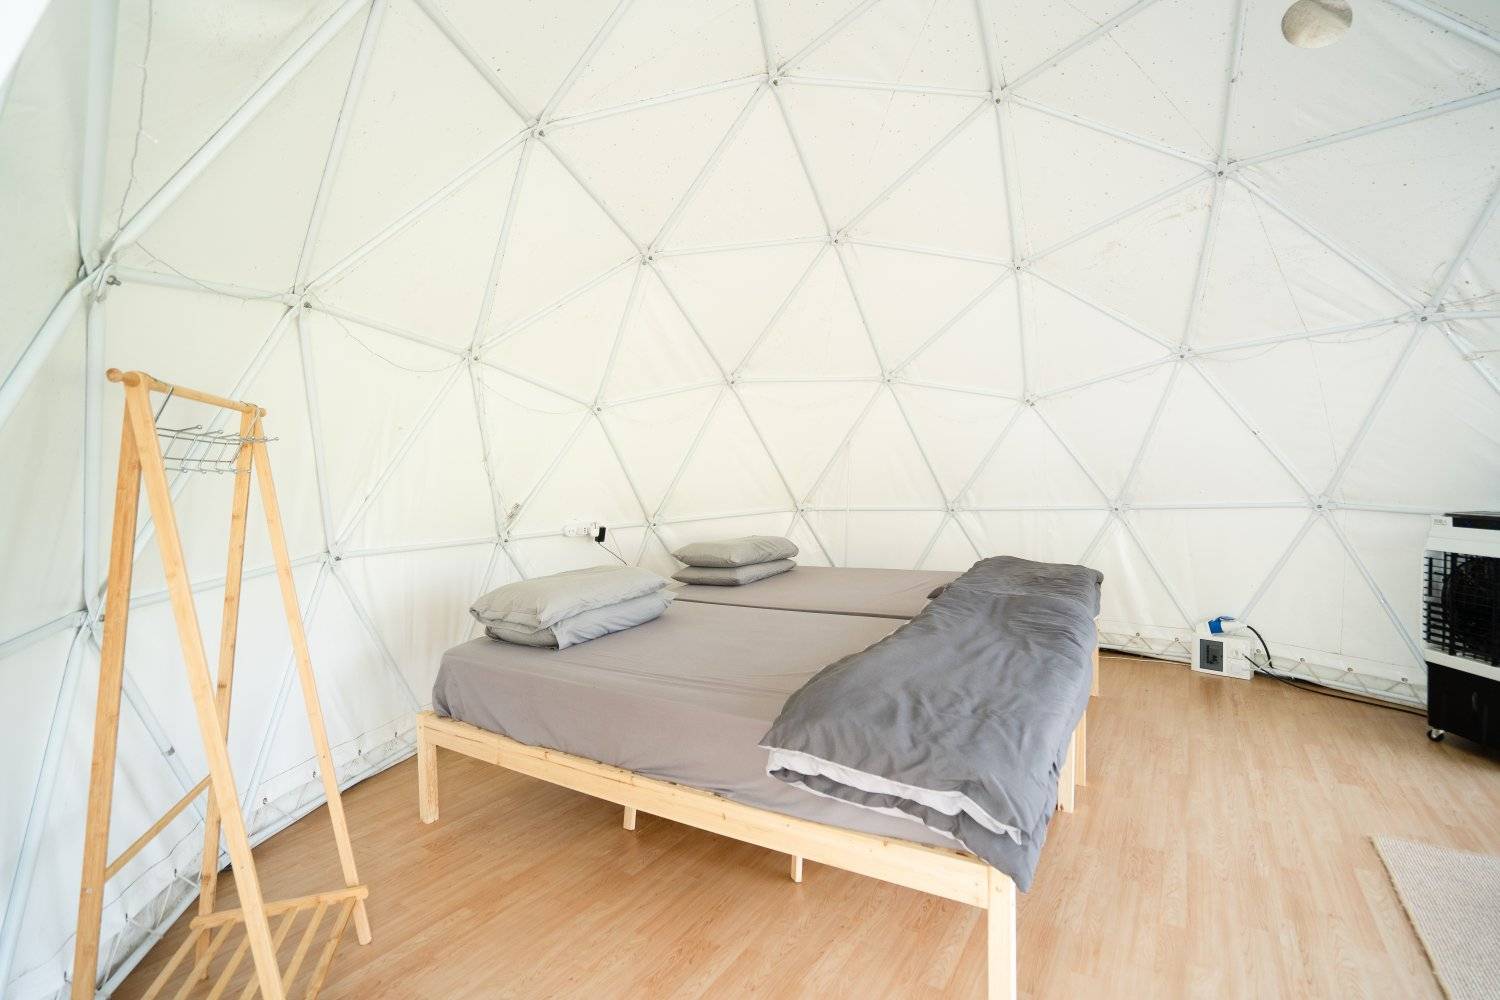 Nomad Terrace - Dome & Bell Tent & Glamping Tent 【Private Platform】 5M Dome Tent  (4 pax) - Zone D terraced area｜Nomad Terrance 8